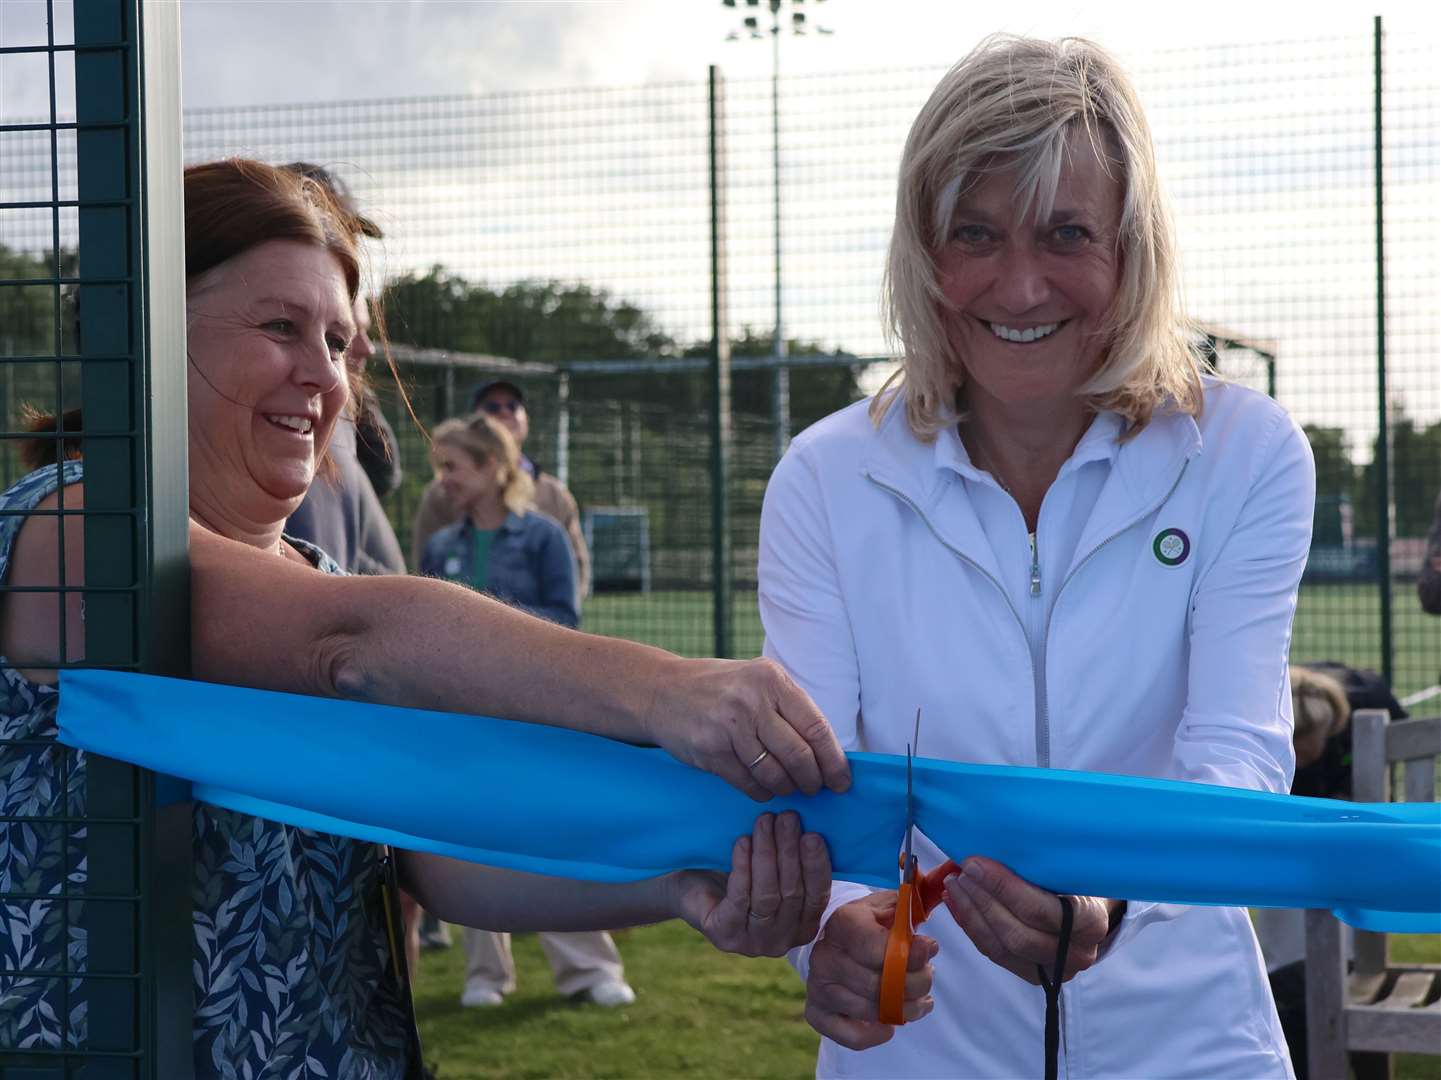 Debbie Jevans CBE, chair of Wimbledon’s All-England Lawn Tennis Club, visited Marden Sports Club to officially open their new padel courts